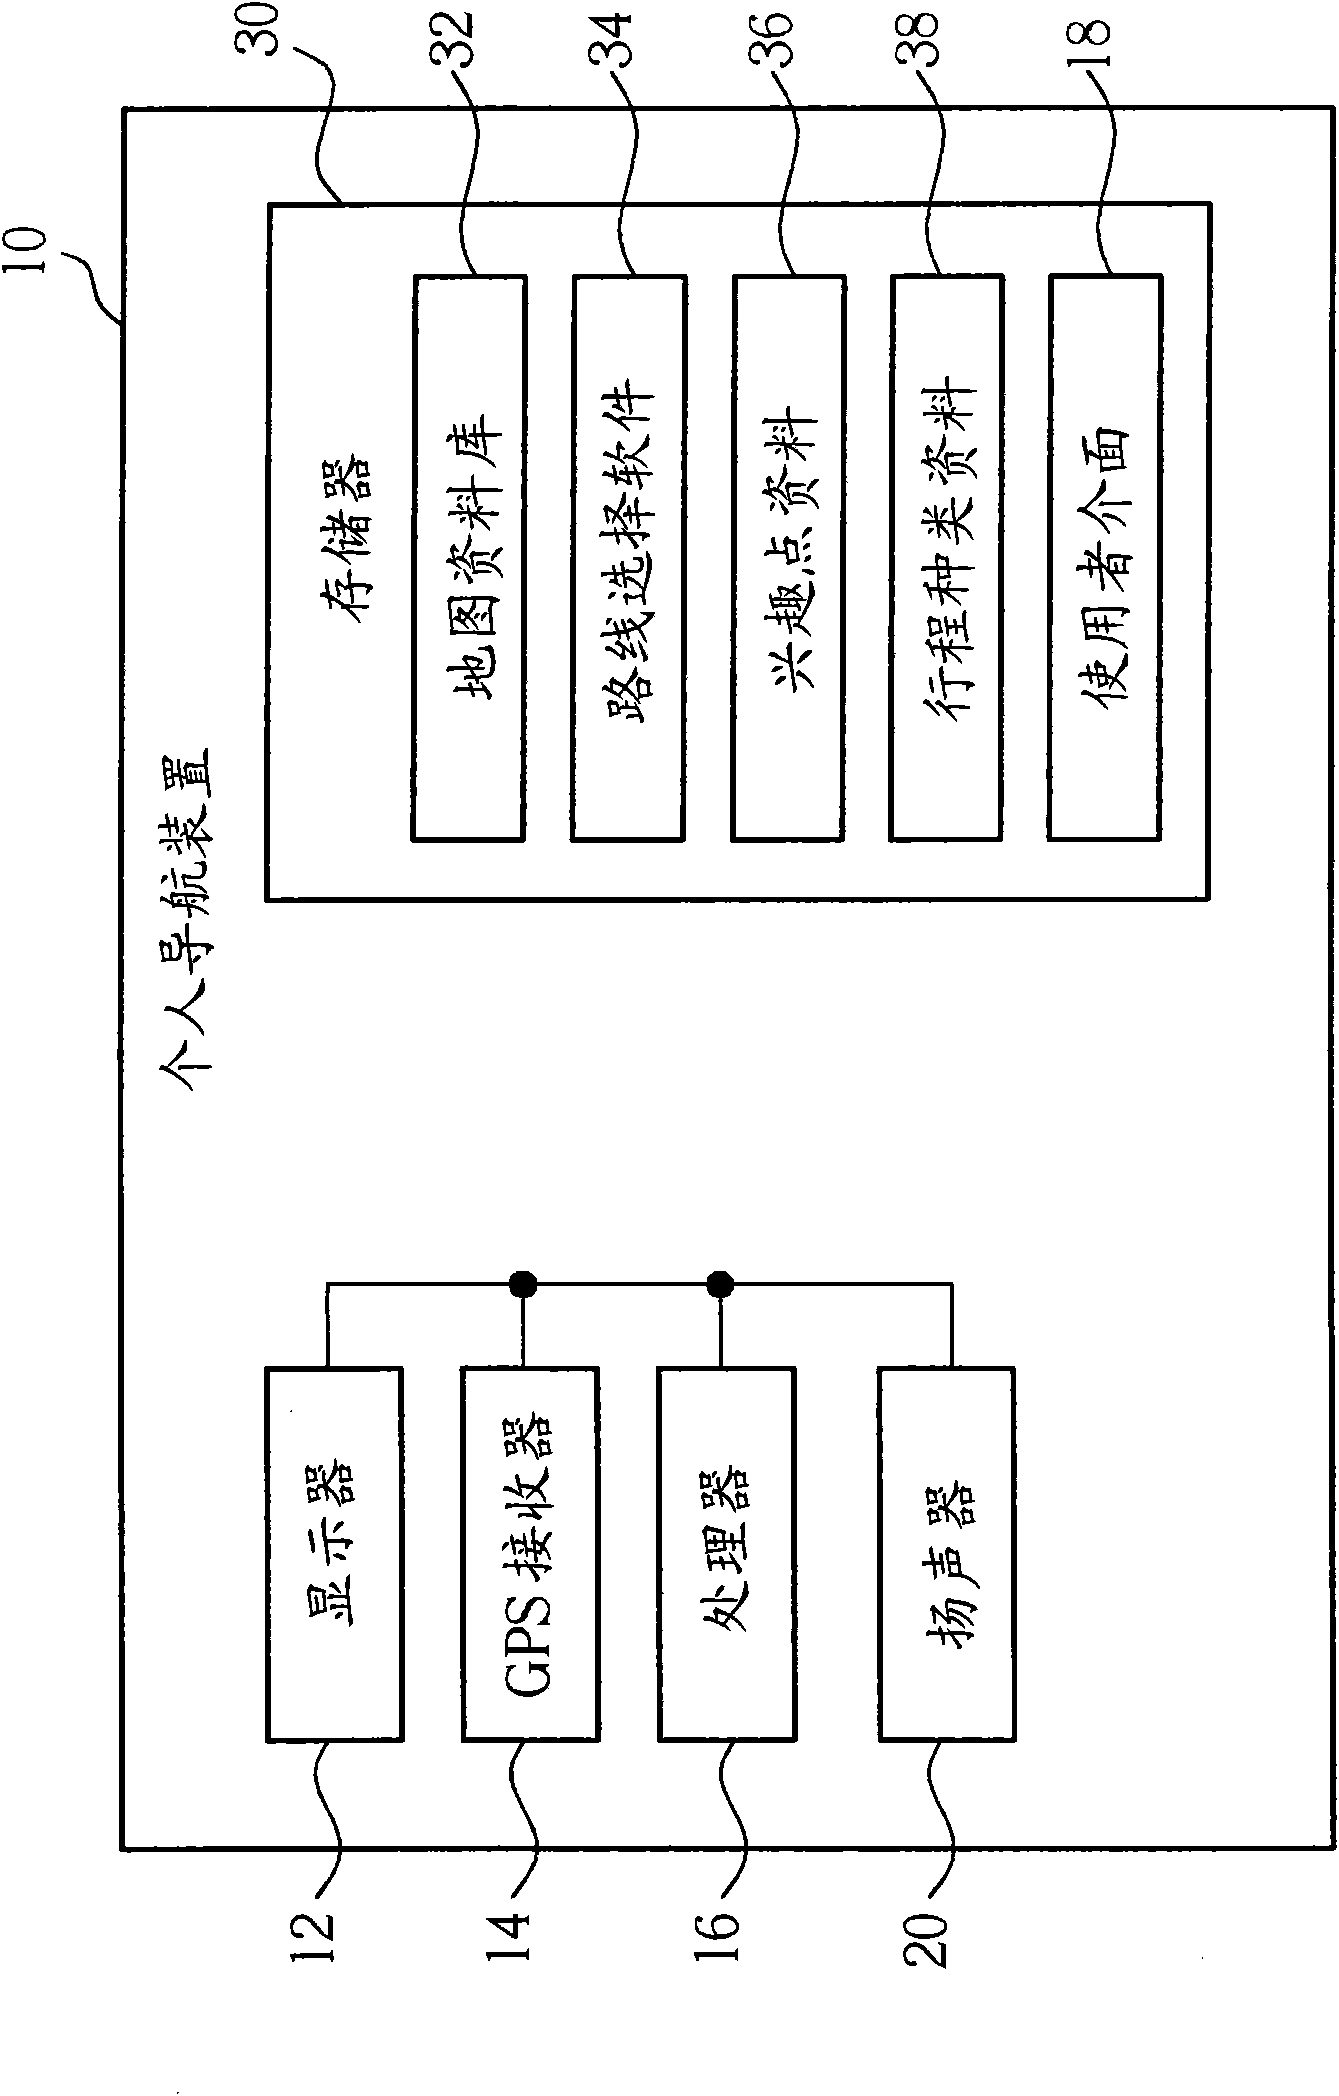 Method and device for selectively displaying interest points according to travel destination